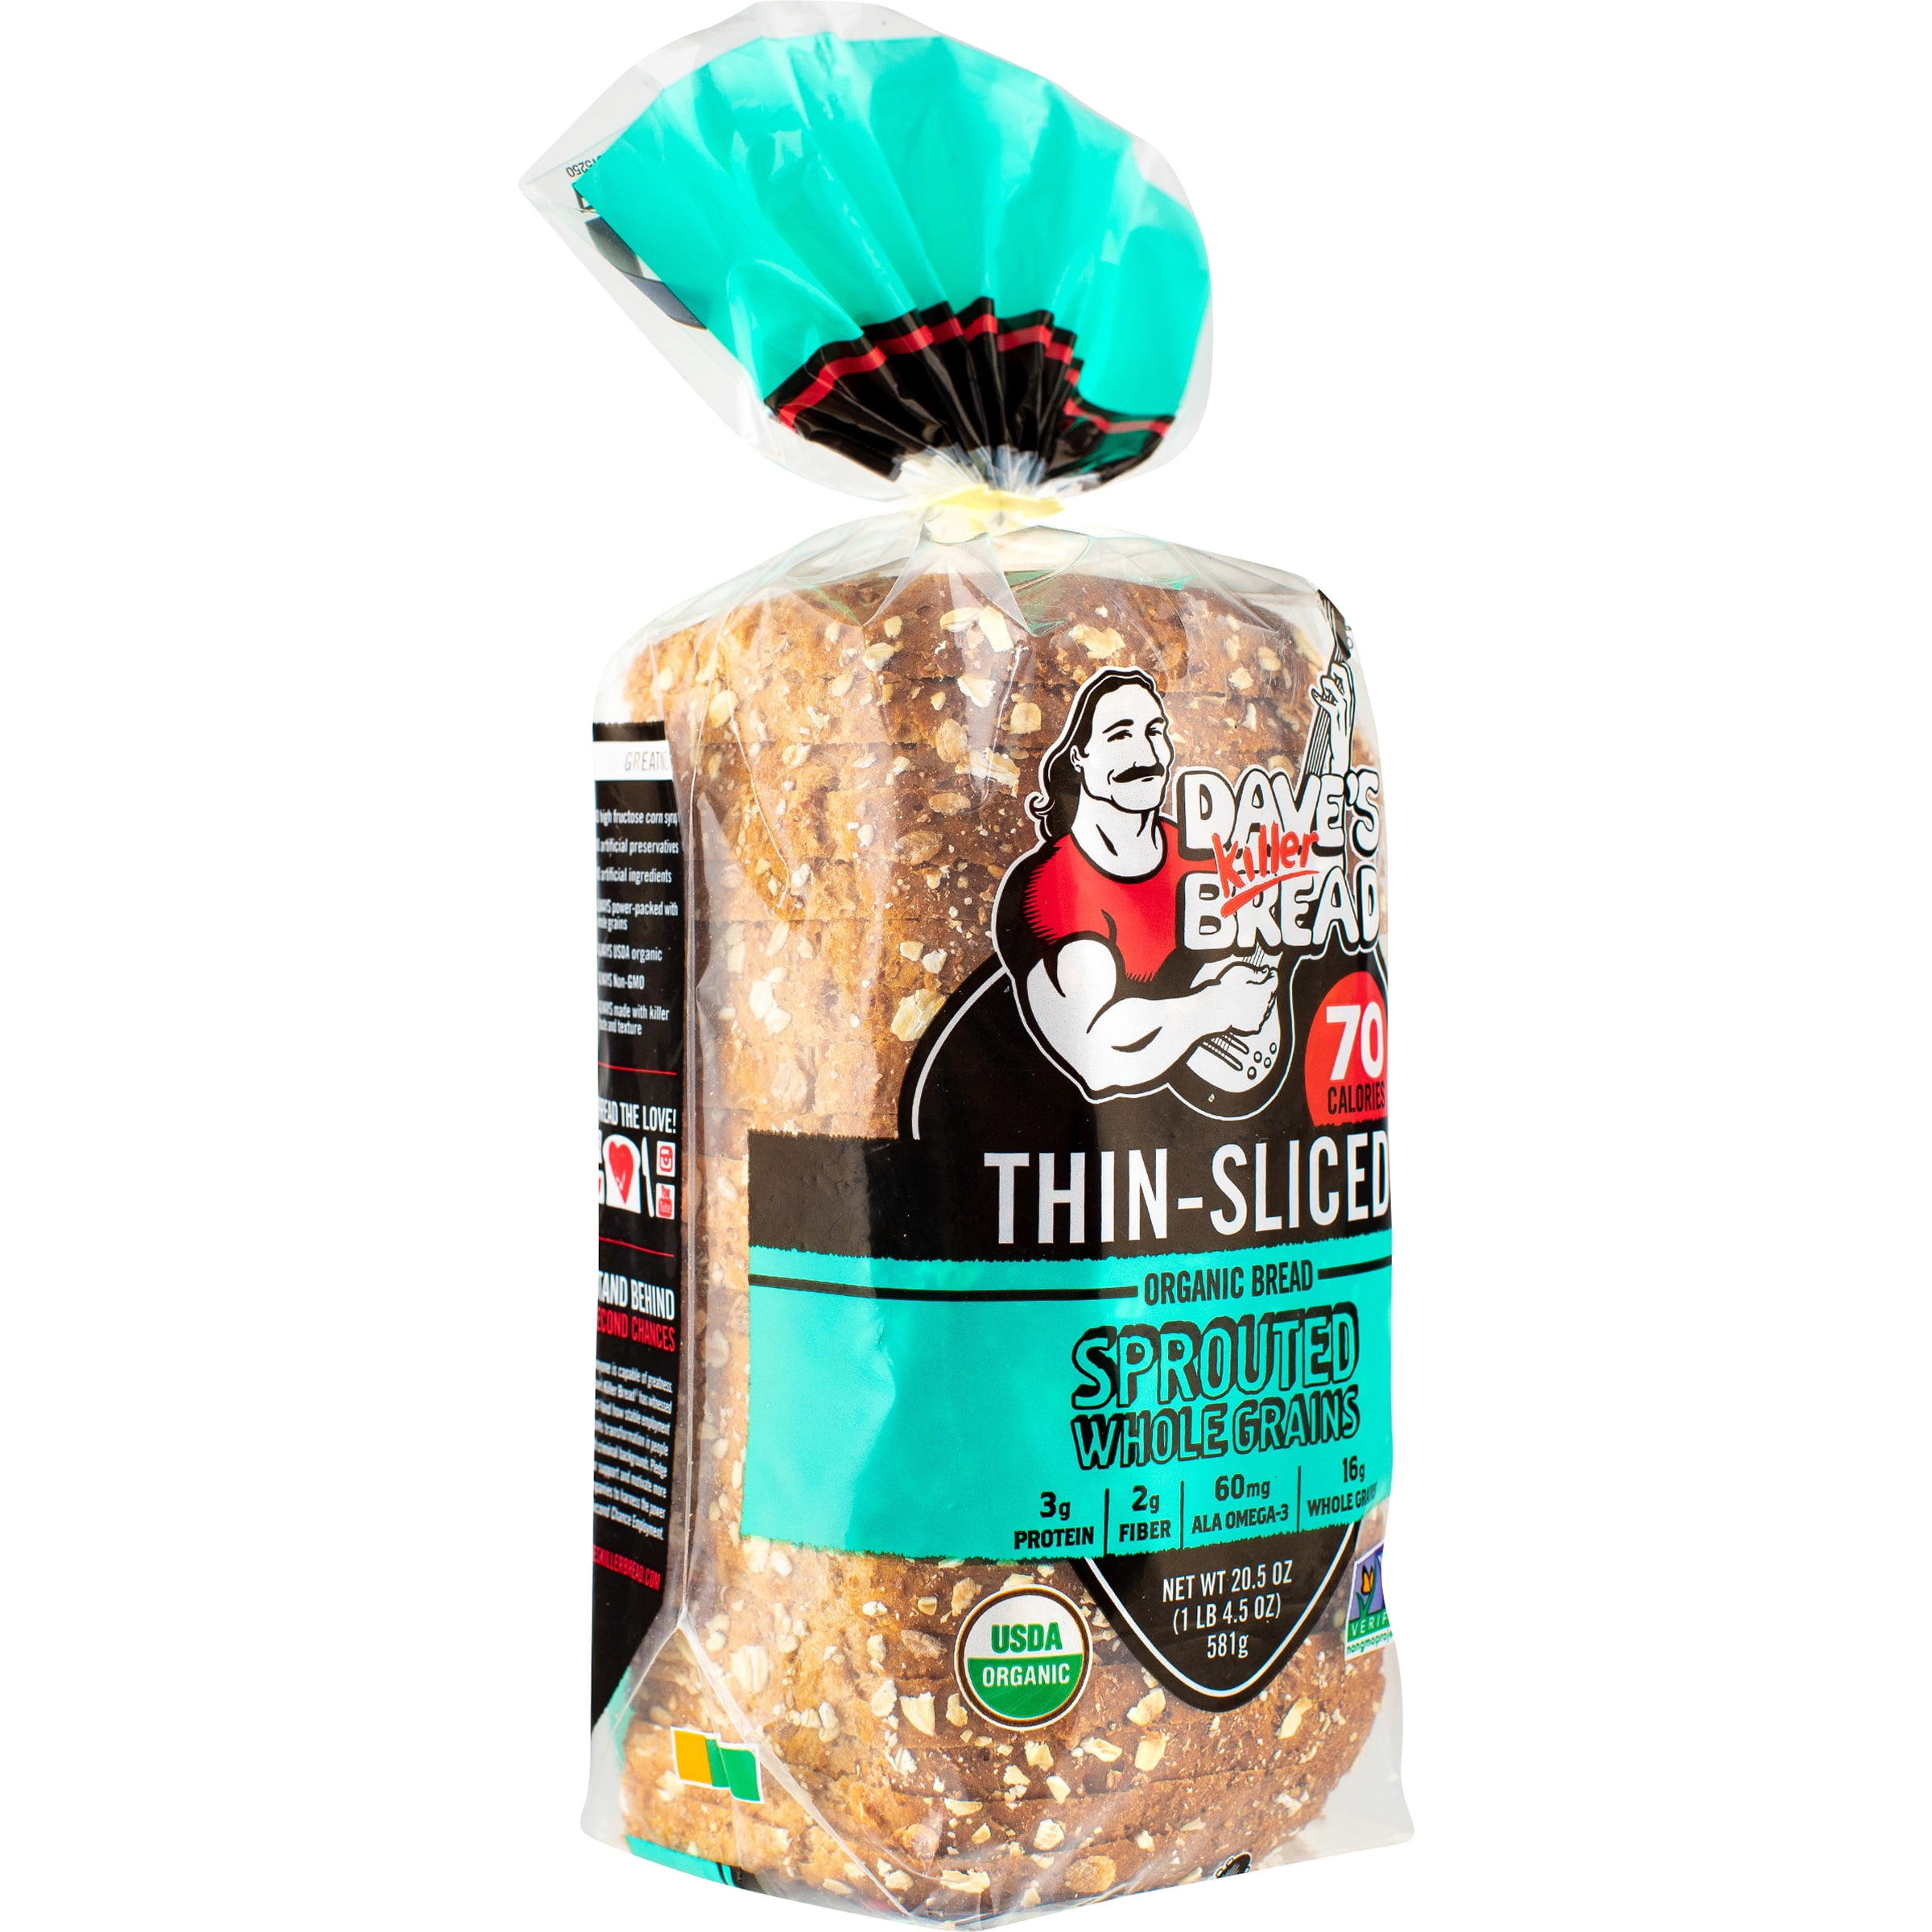 dave-s-killer-bread-sprouted-whole-grains-thin-sliced-organic-bread-20